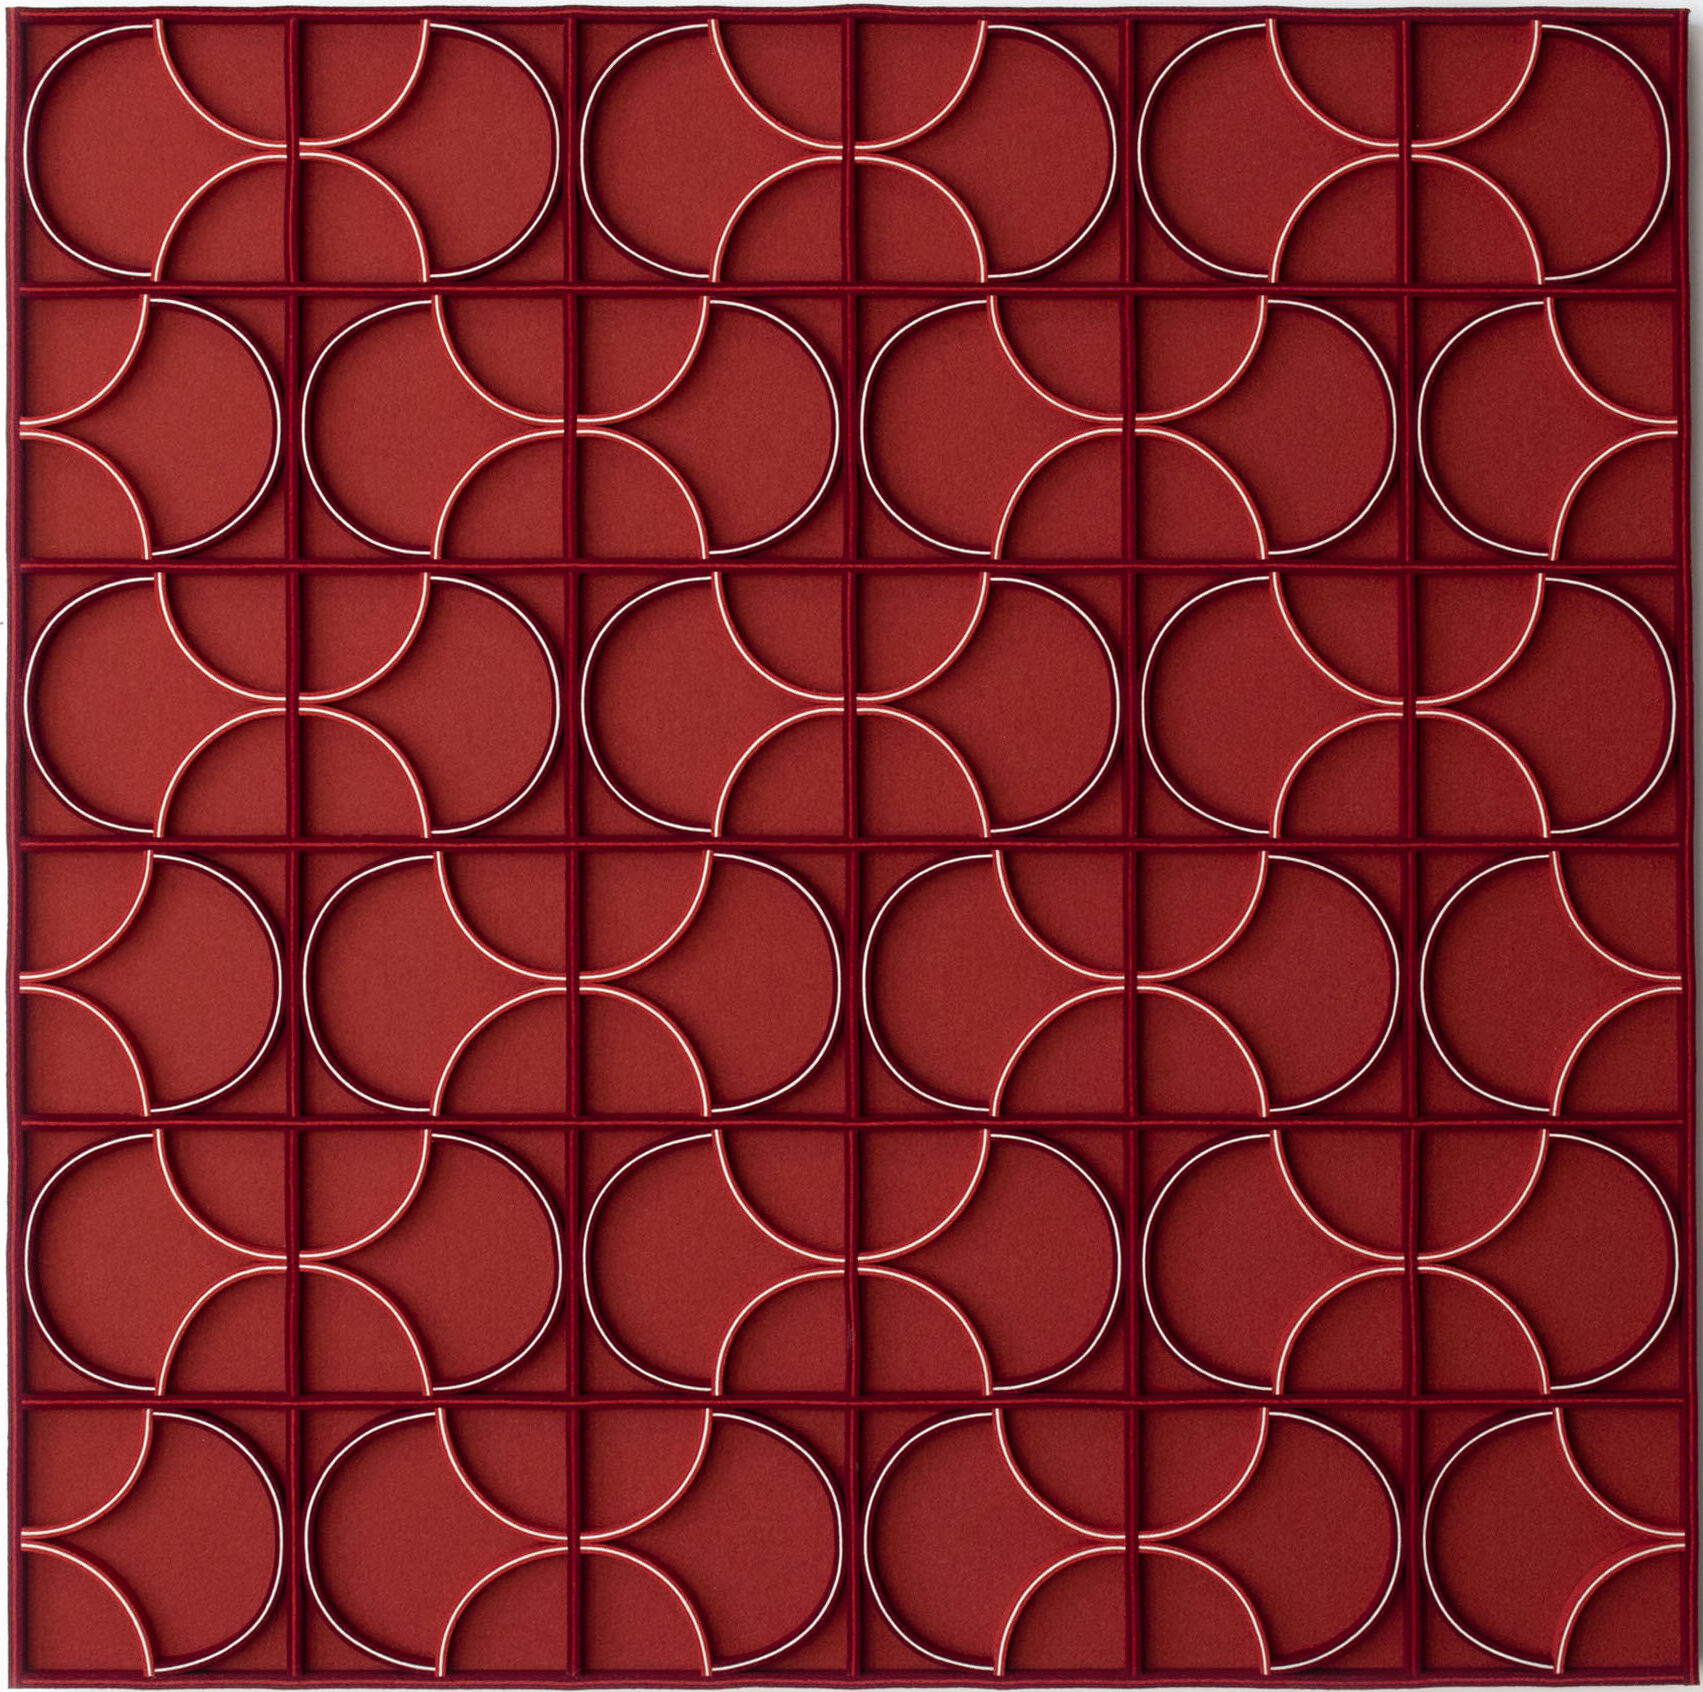 A red square wall panel with curved forms in square boxes with blue and white details